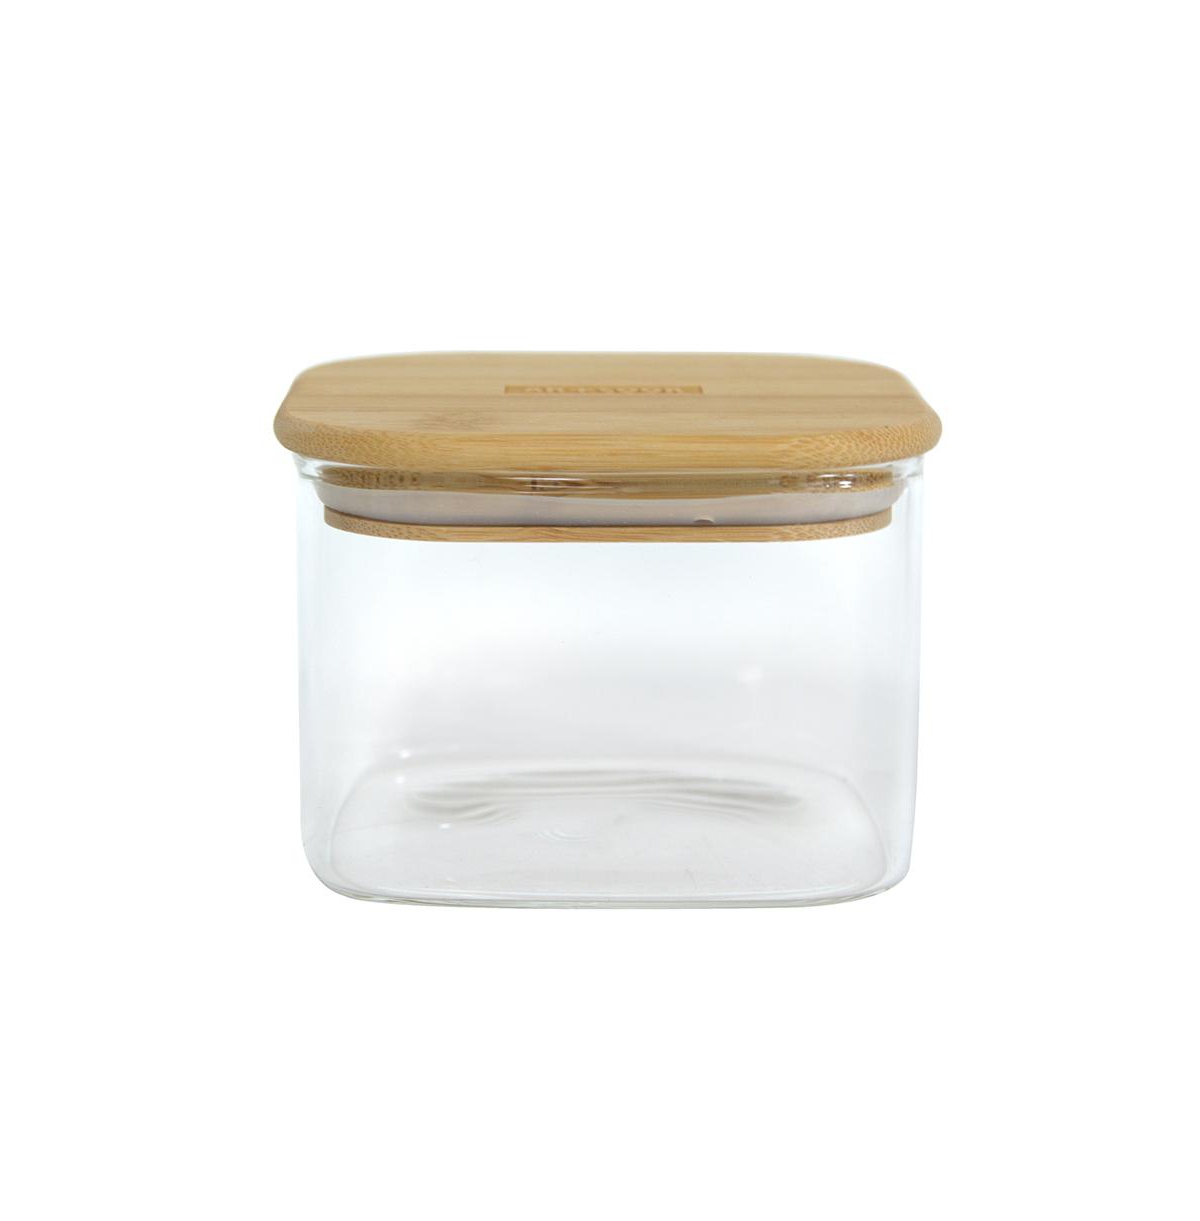 Art & Cook Square Clear High Borosilicate Glass Storage With Flat Bamboo Lid And Plant Oil Surface, 600 ml In Brown